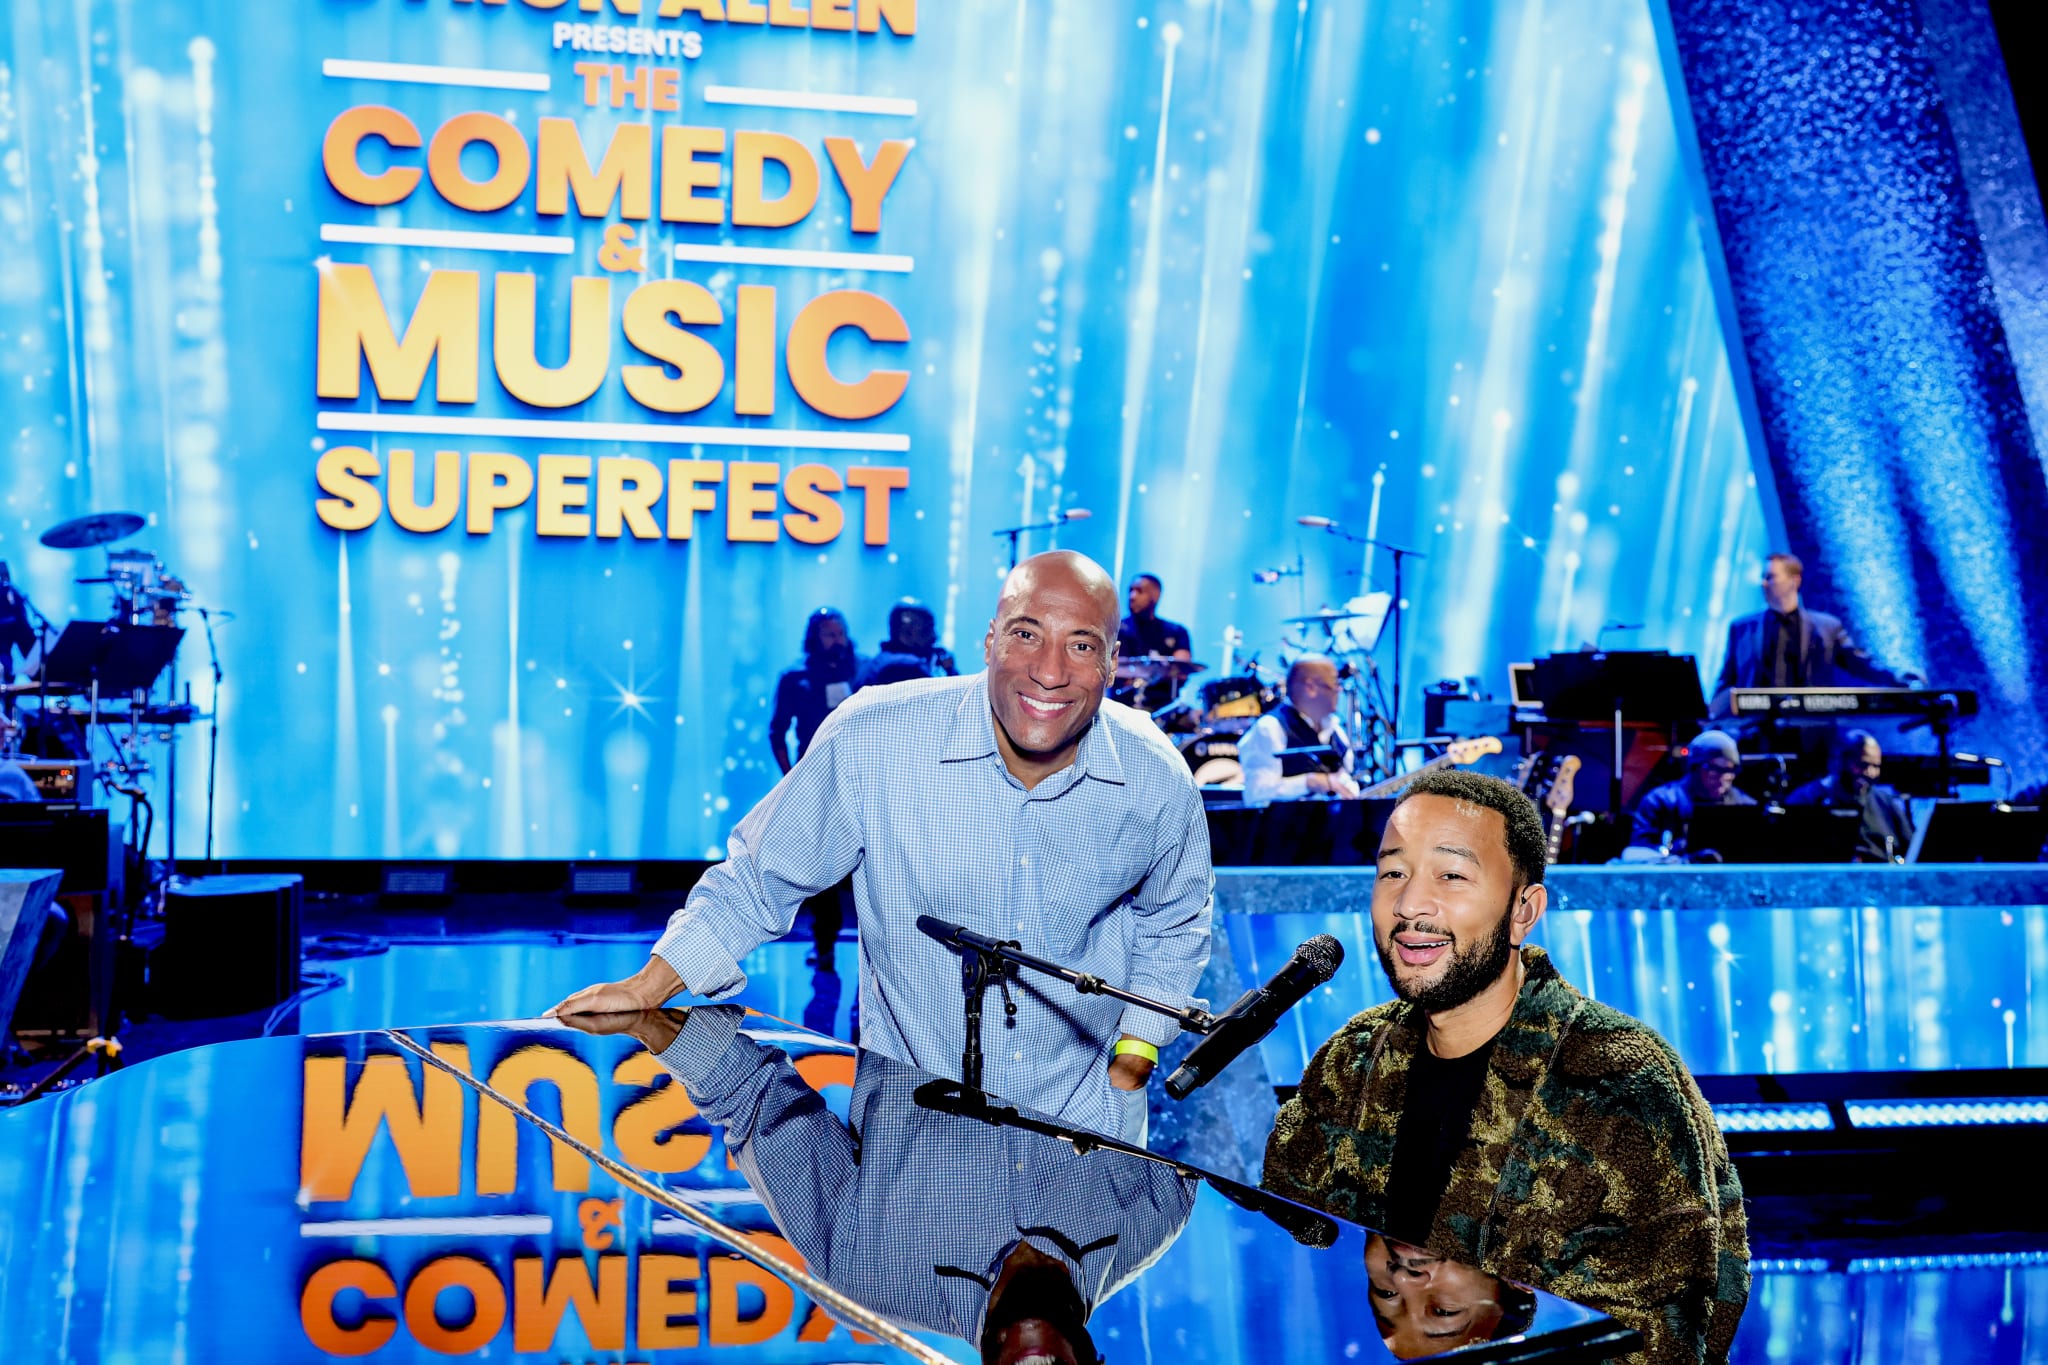 Byron Allen on & Music Superfest' 'We just want to make you